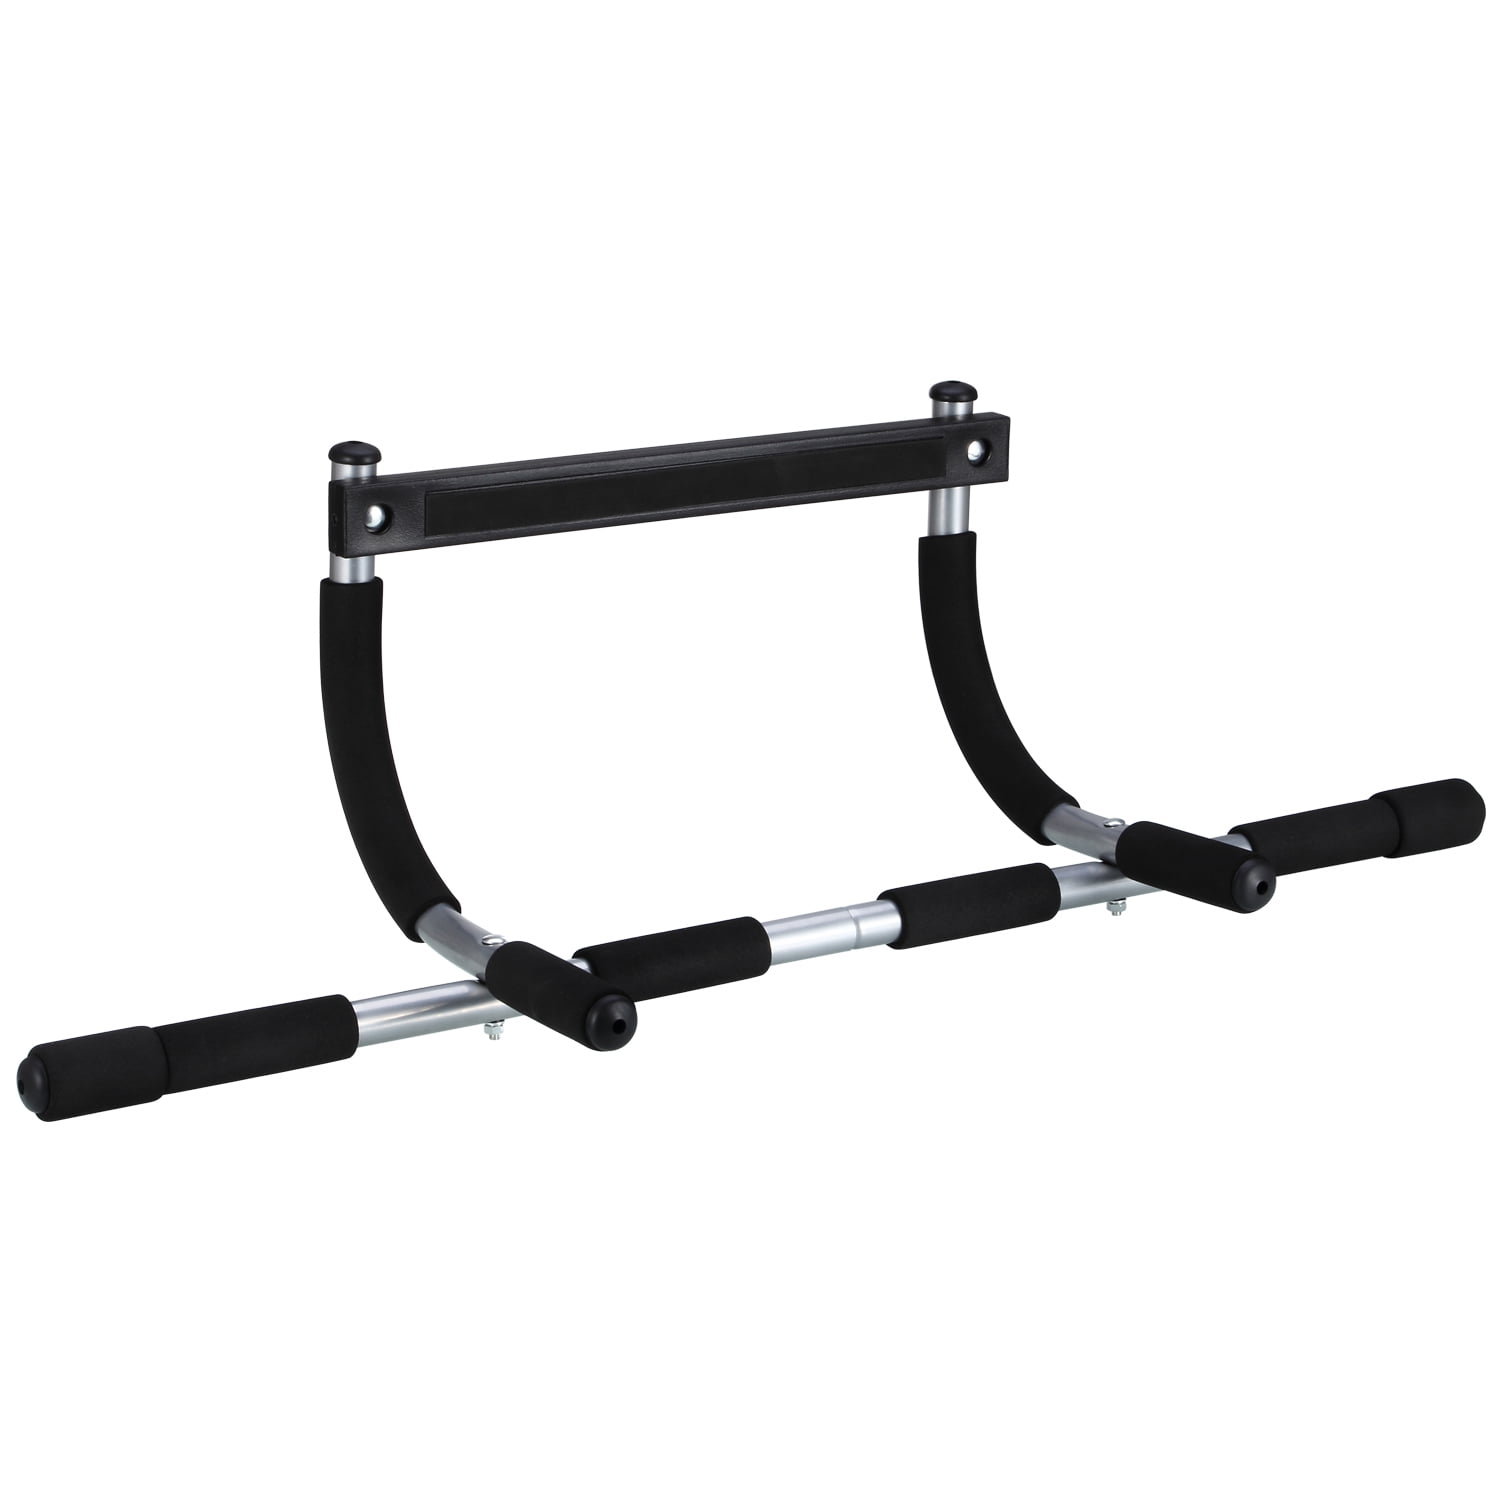 Multifunctional Pull Up Bar Portable Chin Up Upper Body Workout Bar Home Gym Exercise Equipment Strength Training